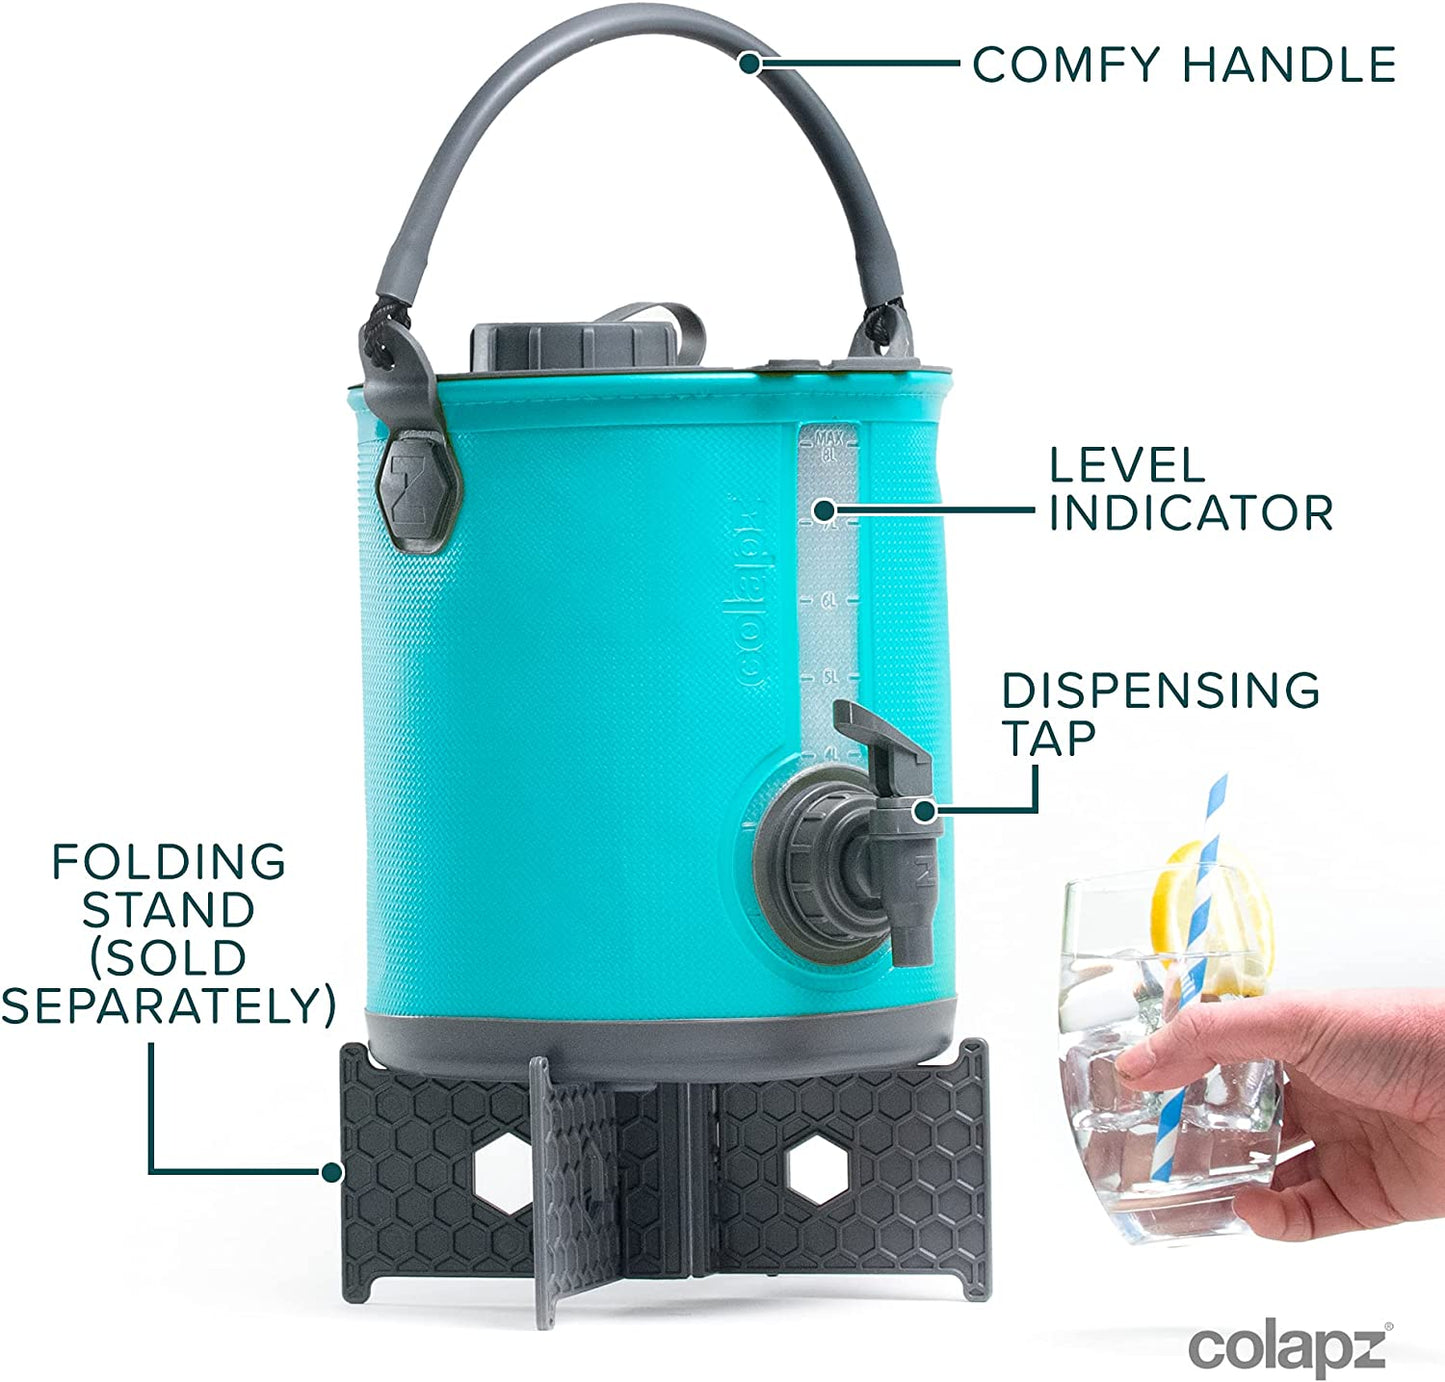 Colapz 2-In-1 Collapsible Camping Water Container with Spigot - 2 Gallon Portable Bucket & Camping Water Jug with Spout - Sports Water Jug - RV Bucket - Water Jug Dispenser - Camping Essentials